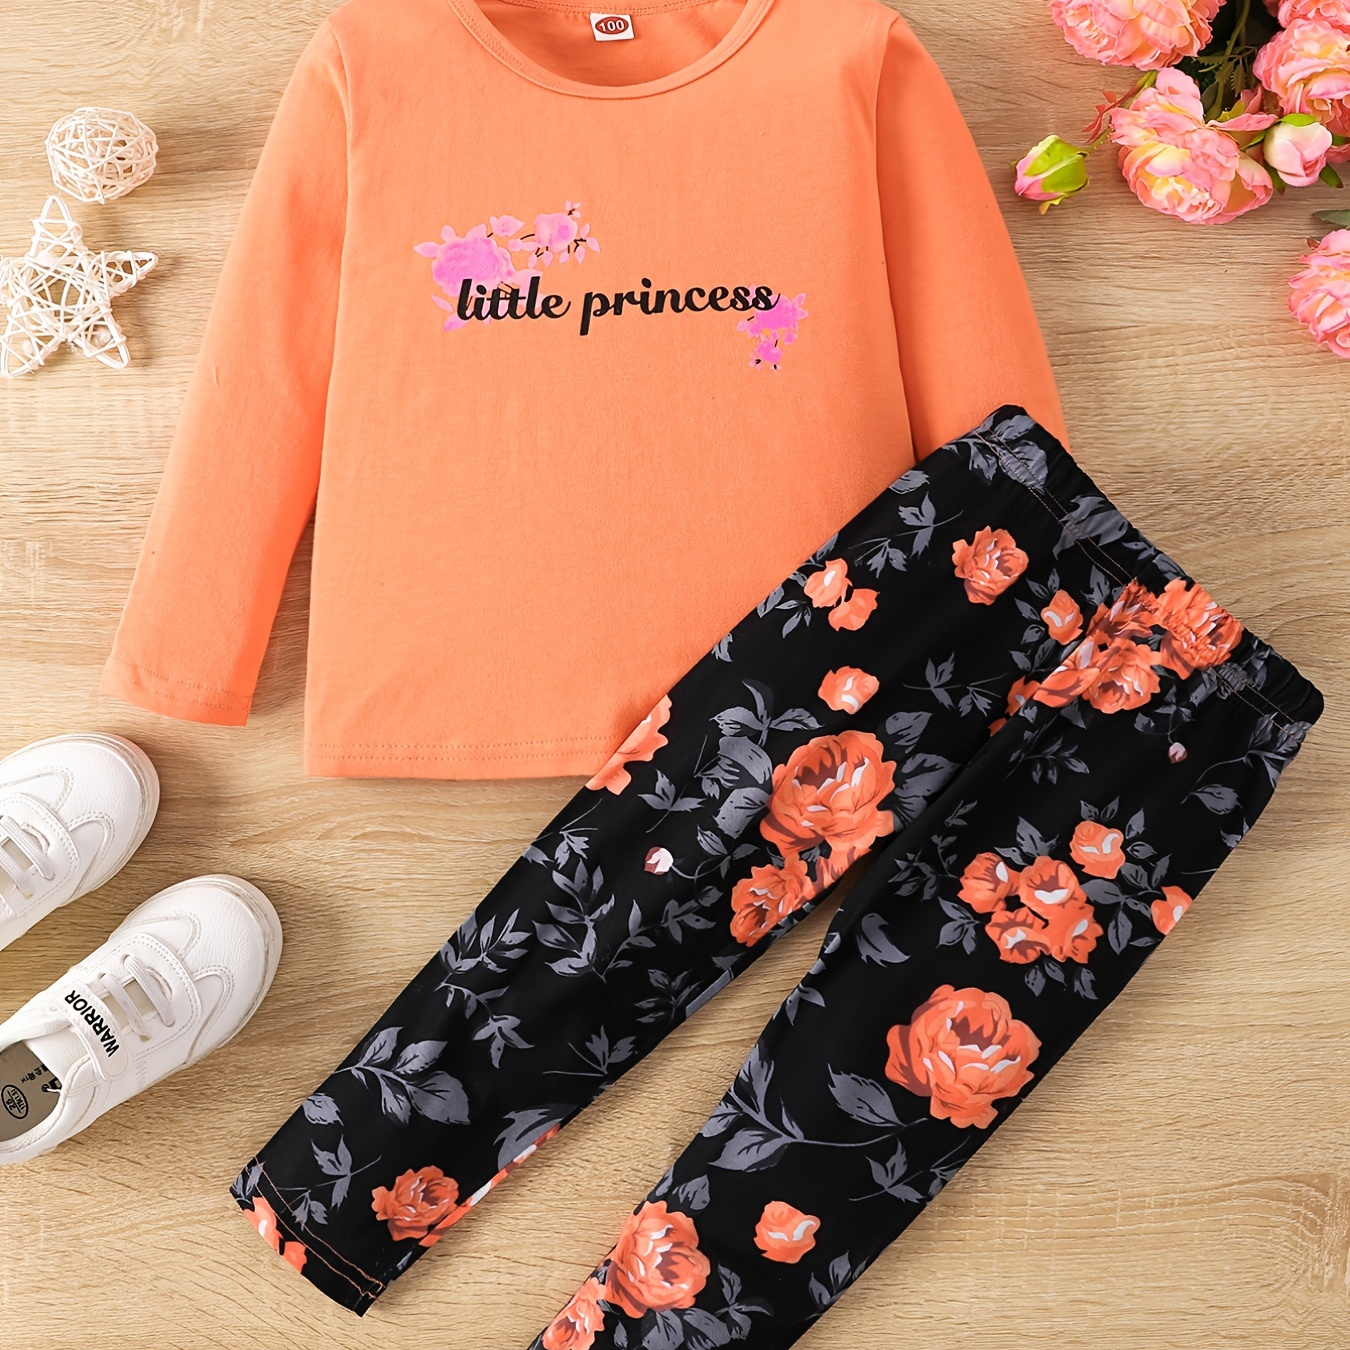 

Girl's Floral Pattern Outfit 2pcs, Long Sleeve Top & Leggings Set, Little Princess Print Kid's Clothes For Spring Fall